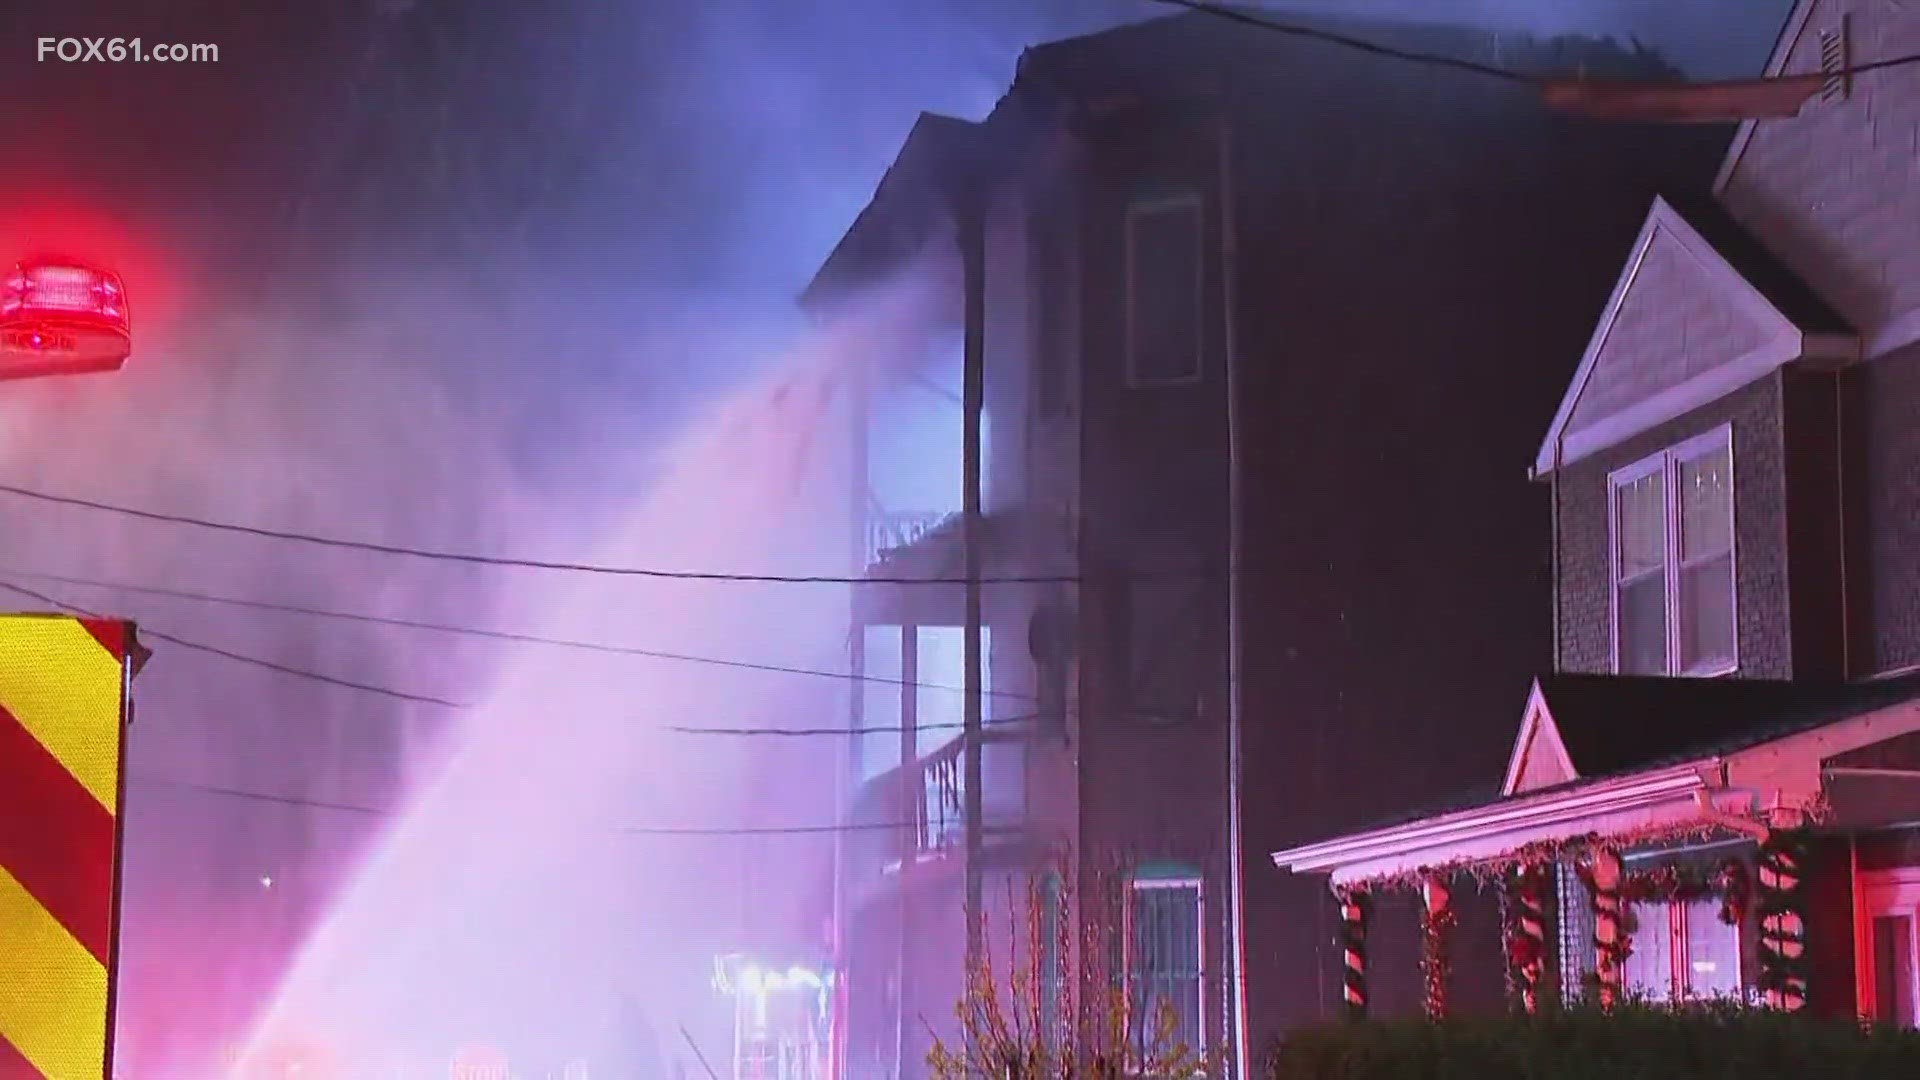 The fire broke out early Thursday morning and firefighters had to battle the intense flames driven by high winds.